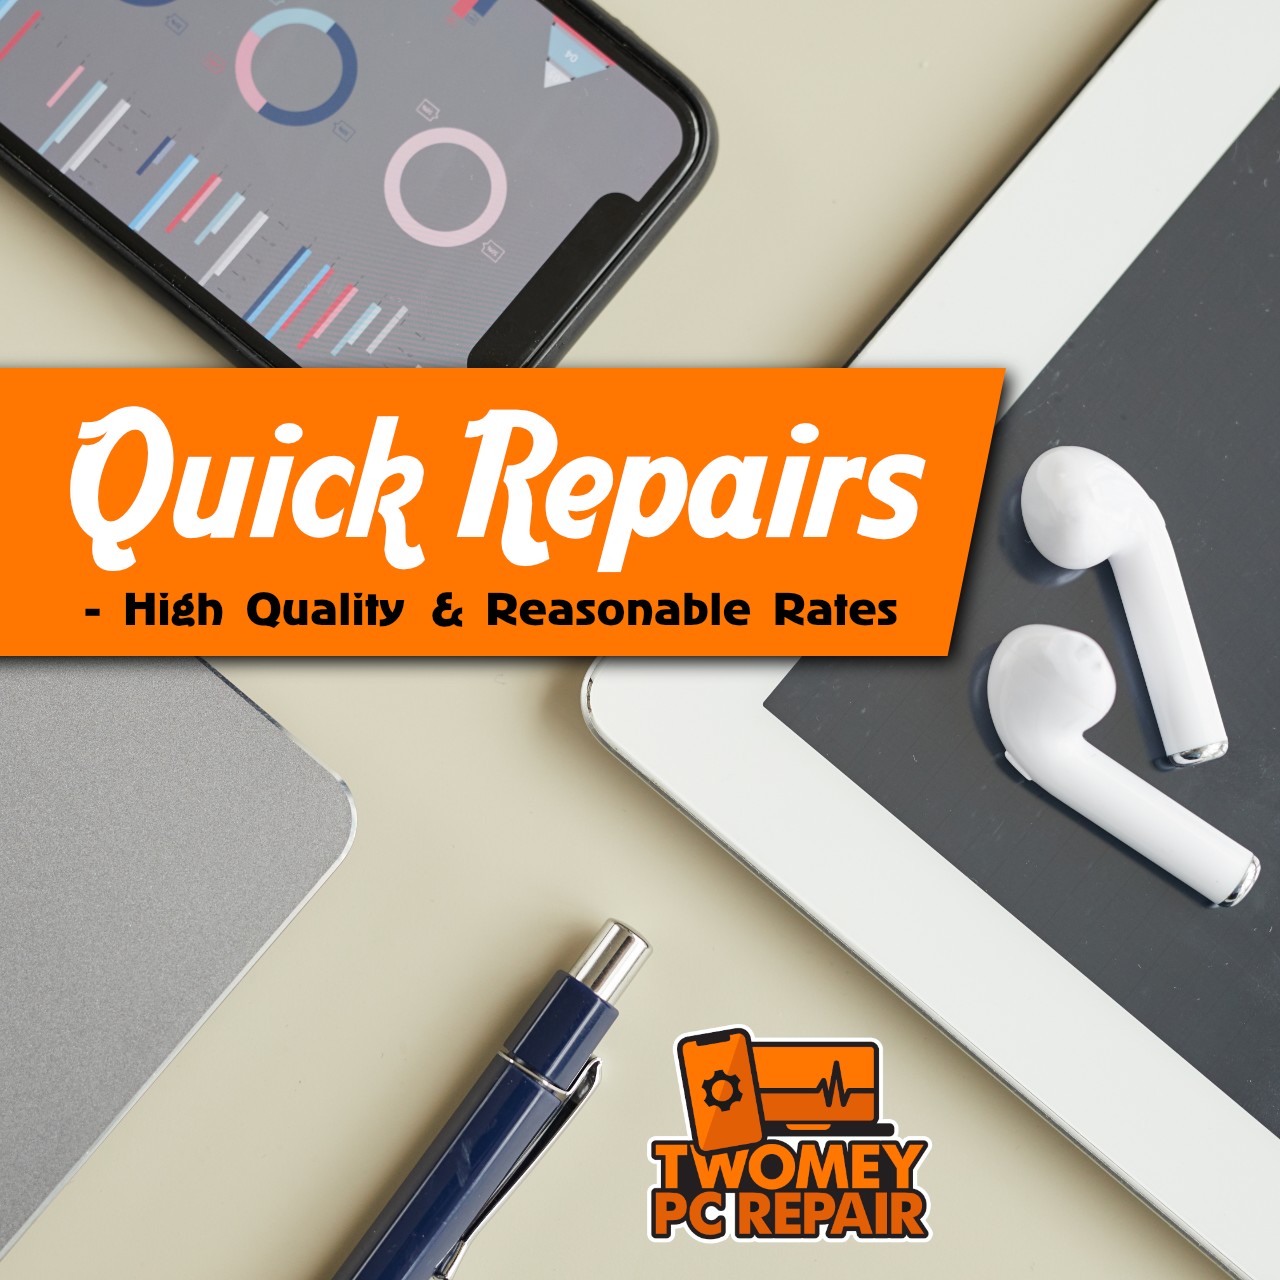 Quick charger port cleaning and cellphone repair services at high quality and reasonable rates.